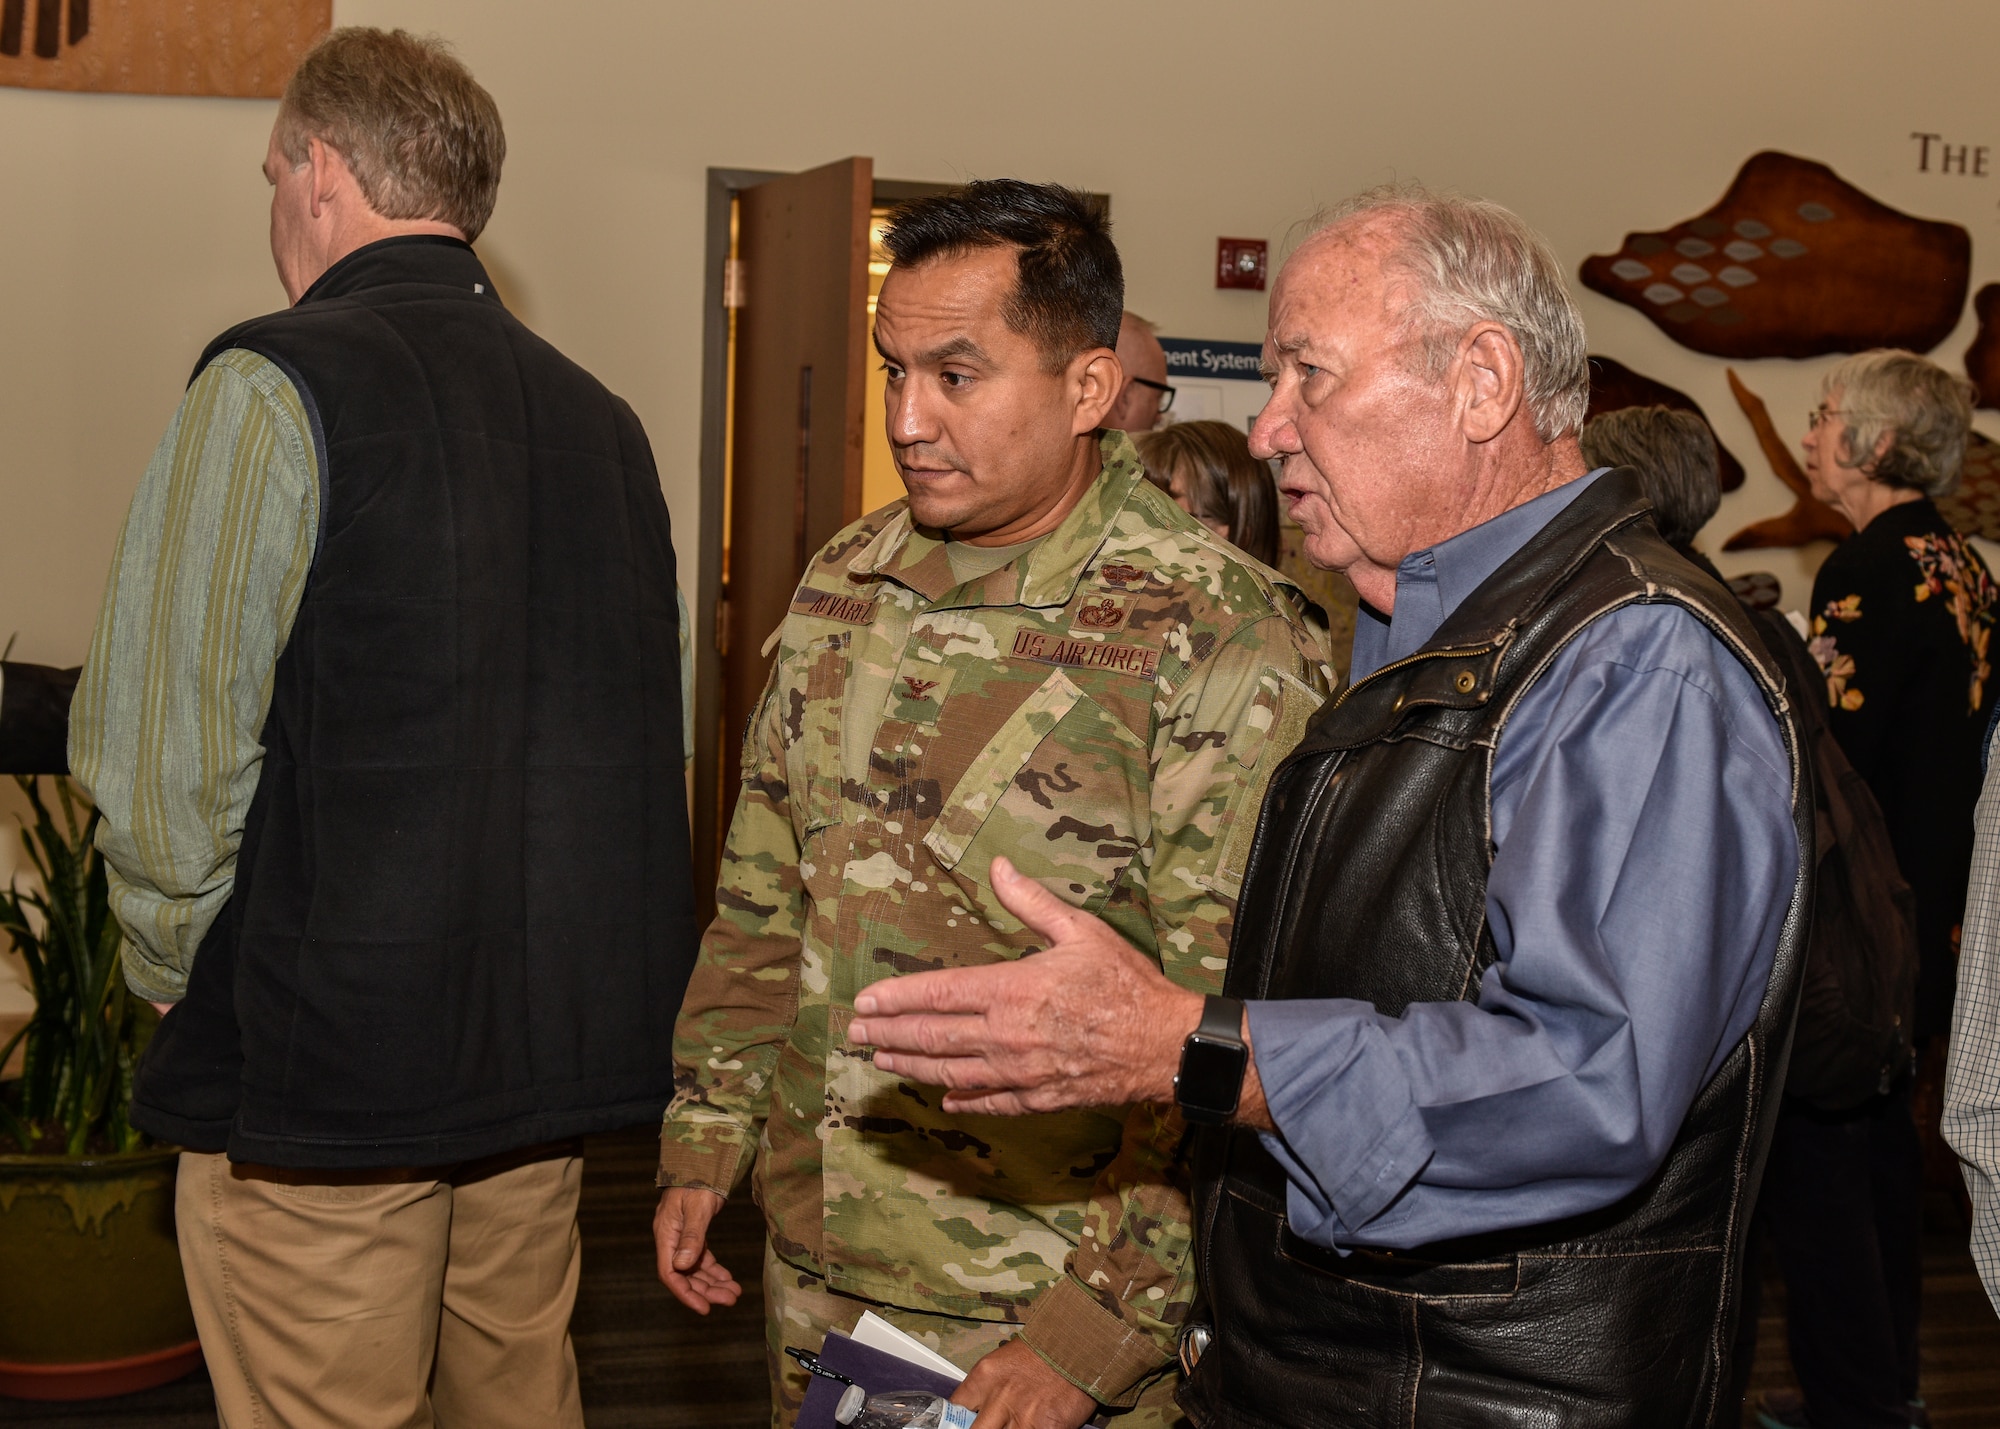 Members of the community attend the Kirtland Air Force Base fuel leak cleanup public meeting at the African American Performing Arts Center in Albuquerque, N.M., Sept. 20, 2019. The meeting served to keep the community informed to the progress being made and steps that are being taken along the way. (U.S. Air Force photo by Senior Airman Enrique Barceló)